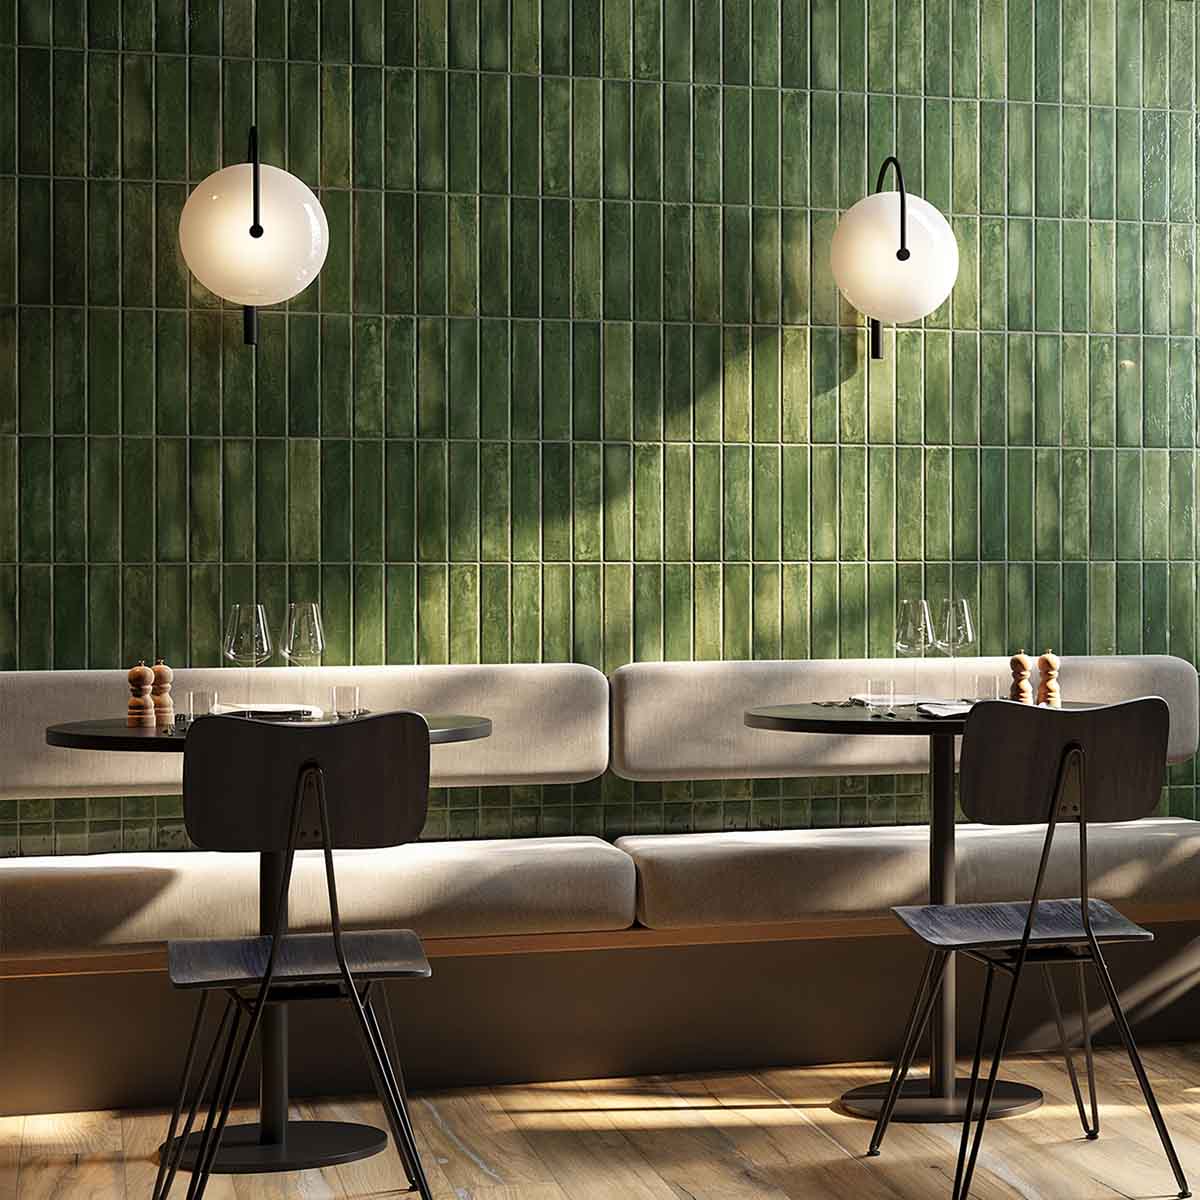 mojave green ceramic wall tile 6x20cm gloss collage deluxe bathrooms ireland